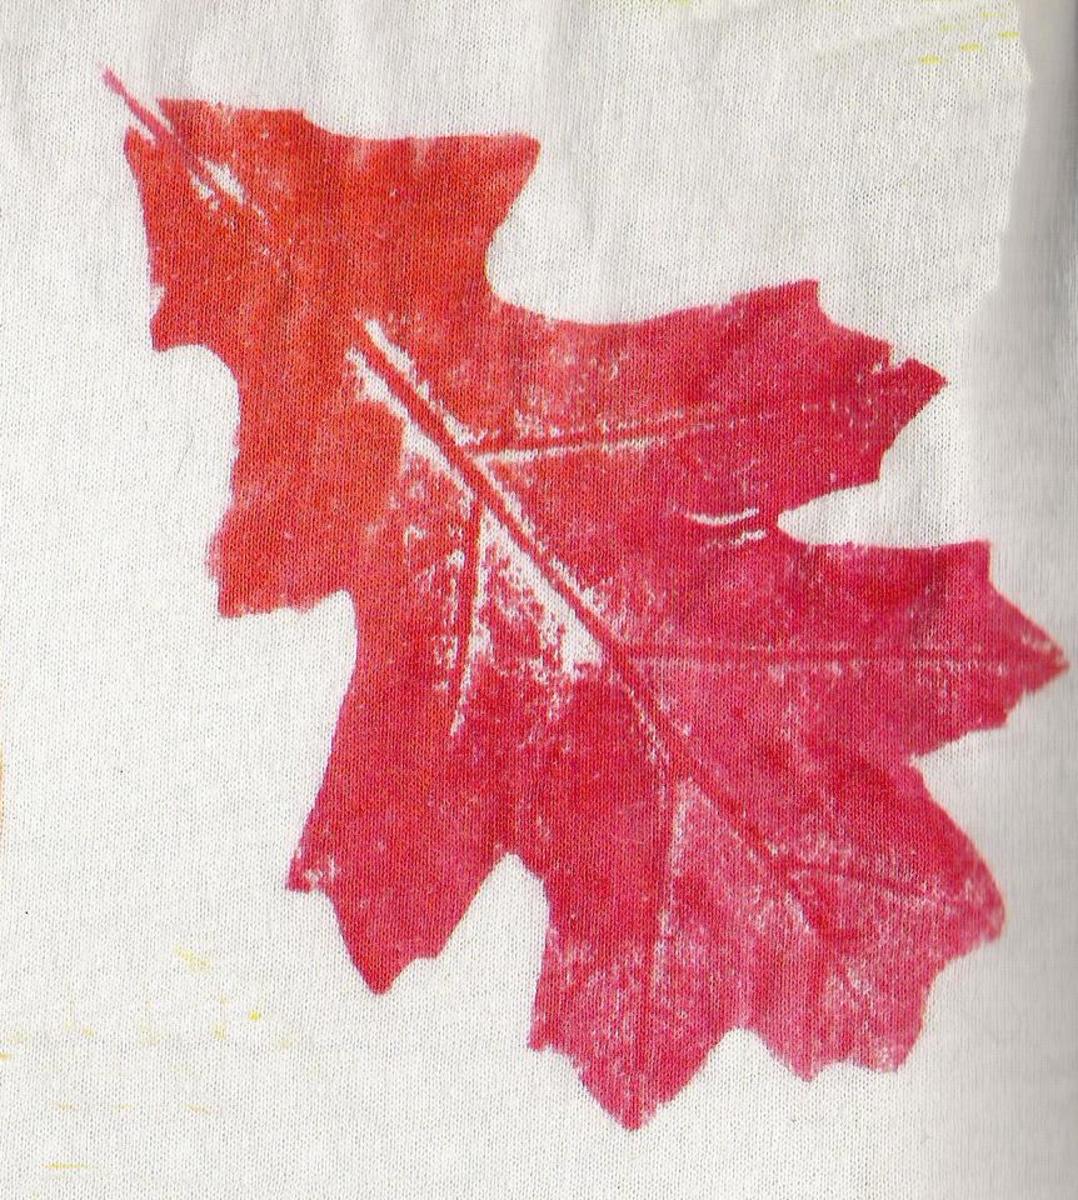 Do-It-Yourself Nature Crafting: Leaf Printing, Stamping and Fall Learning Fun